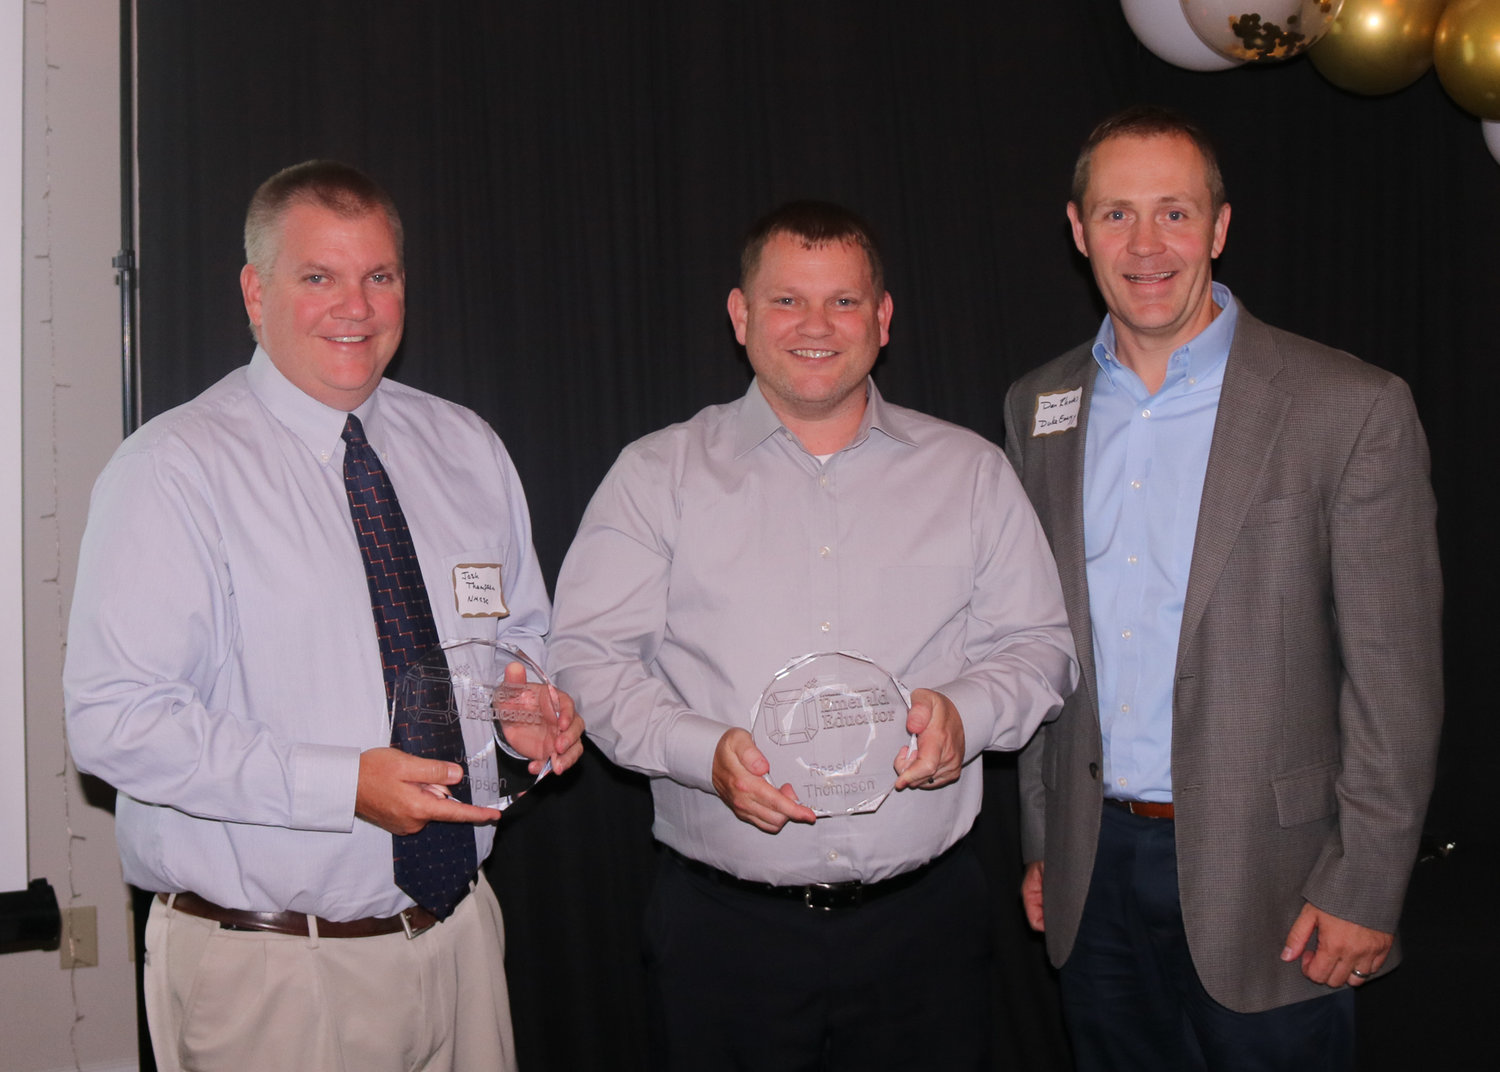 Josh Thompson from North Montgomery High School, left, and Reasley Thompson from Southmont High School, center, received Emerald Educator awards. Gary Linn of Crawfordsville High School was the third recipient, but was unable to attend the awards ceremony.